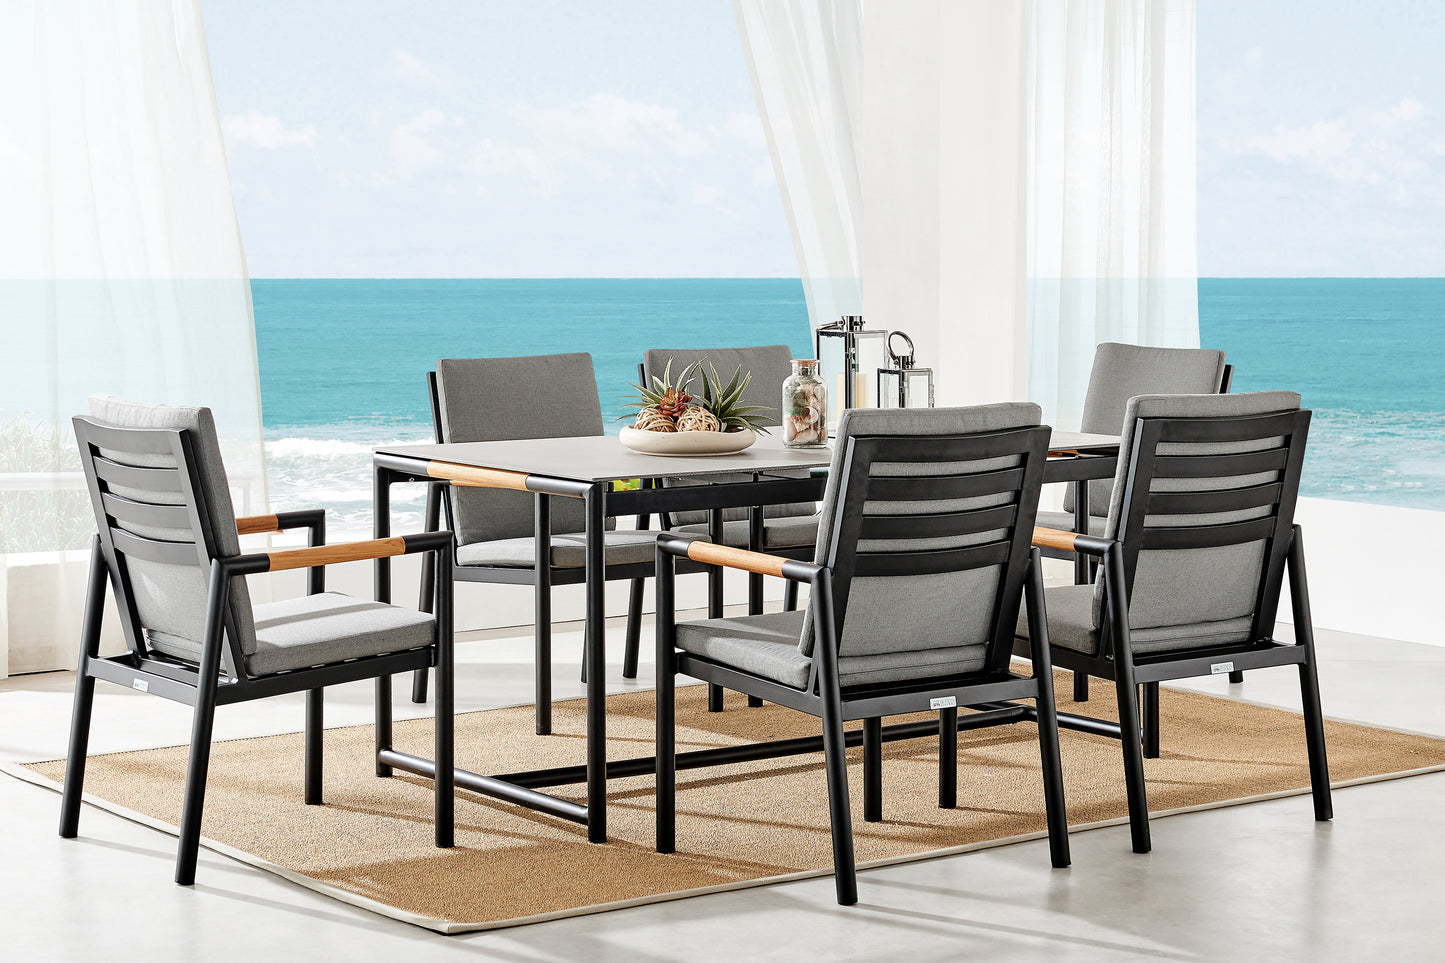 Crown 7 Piece Black Aluminum and Teak Outdoor Dining Set with Dark Gray Fabric